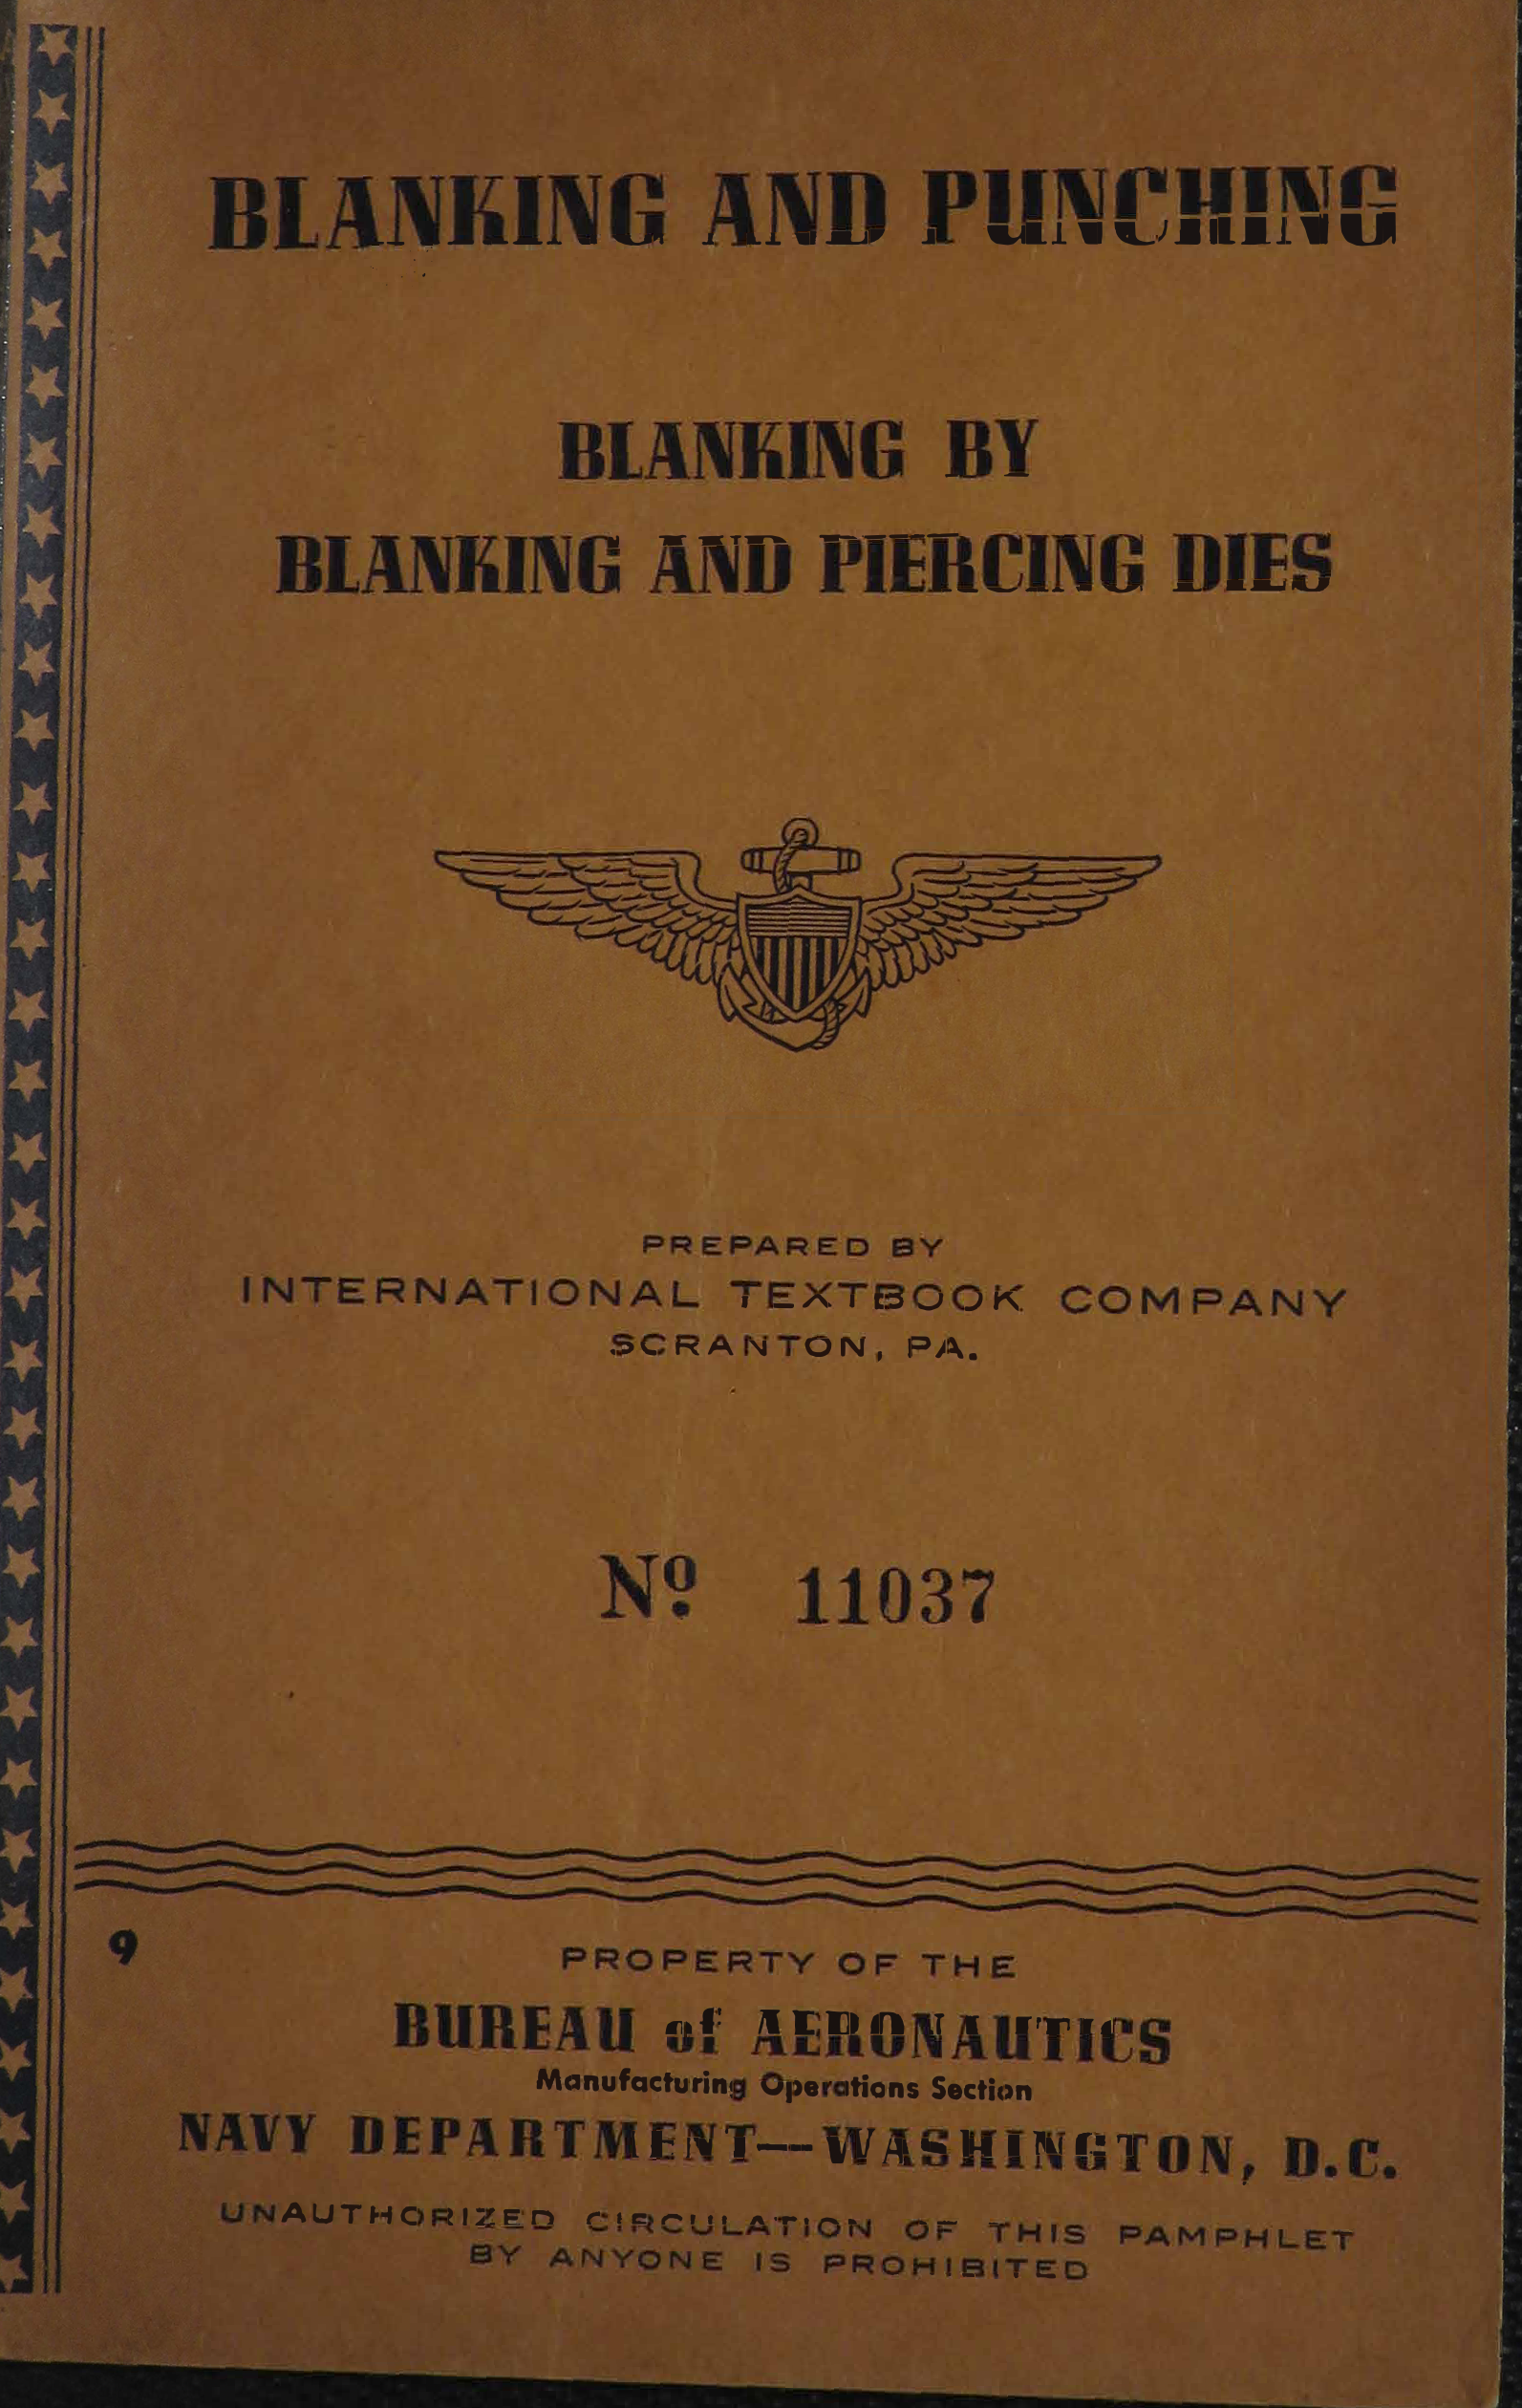 Sample page 1 from AirCorps Library document: Blanking and Punching - Blanking by Blanking and Piercing Dies - Bureau of Aeronautics